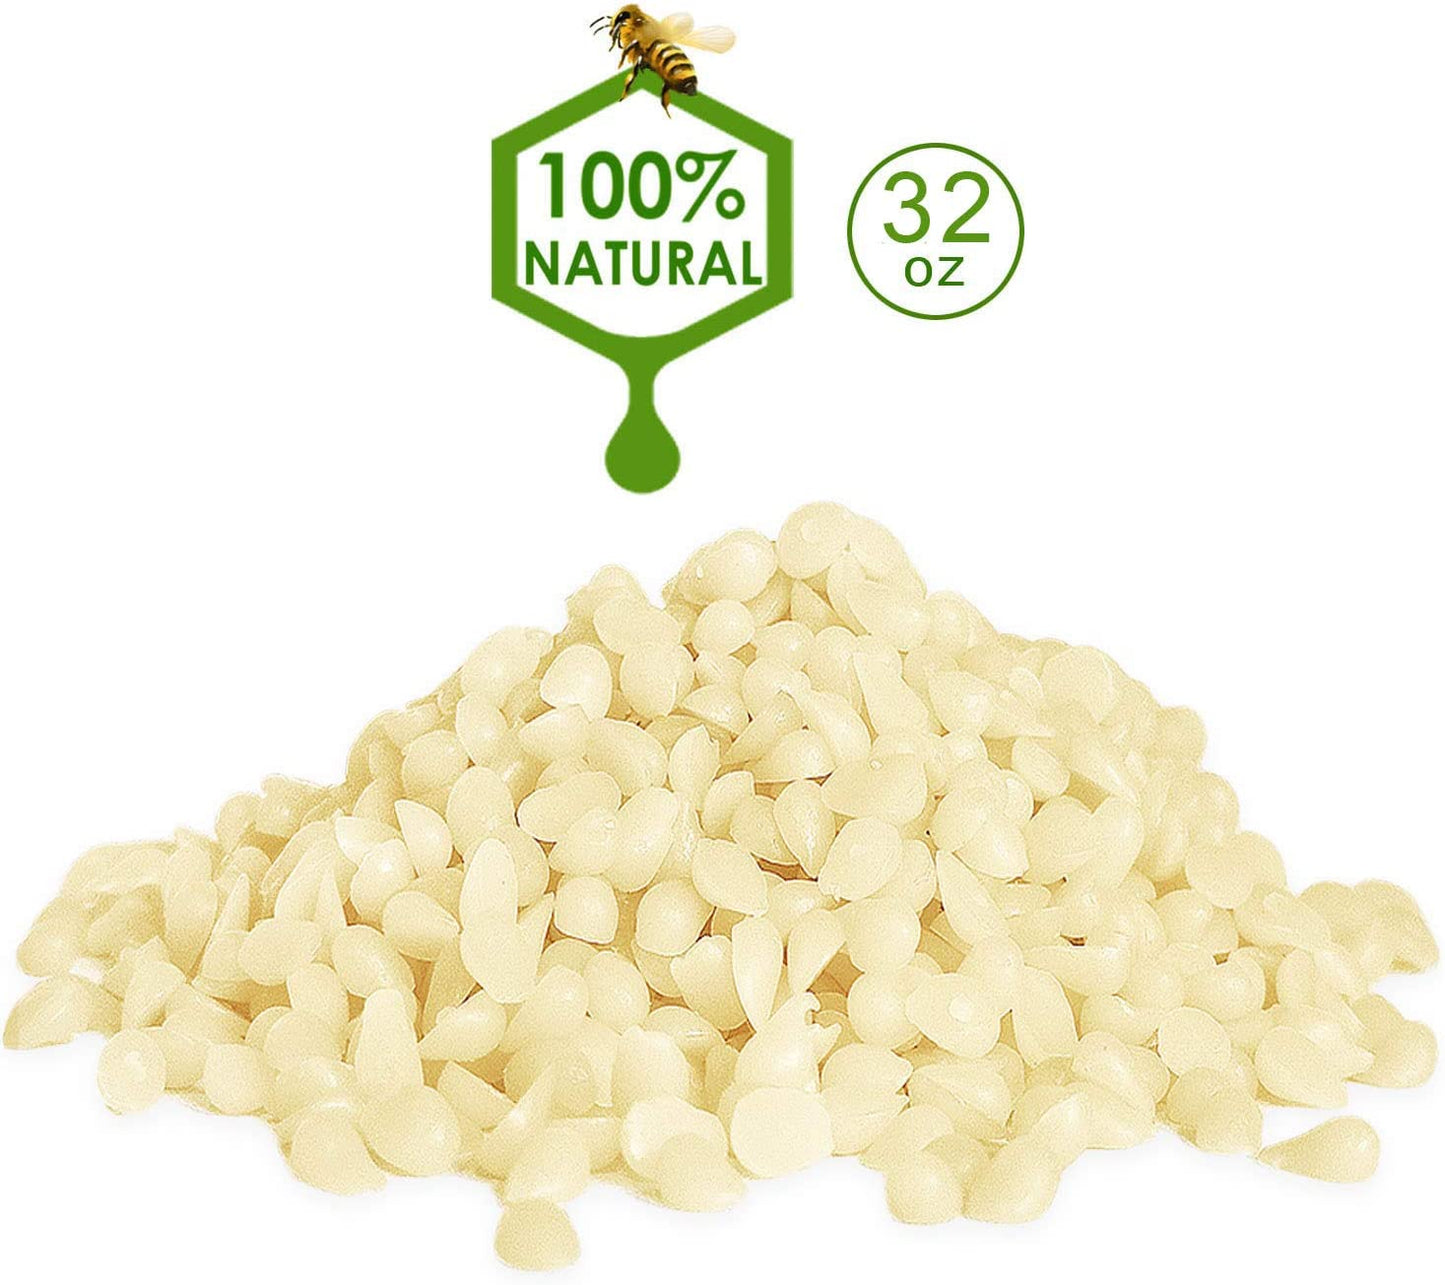 White Beeswax Pellets 2LB 100% Pure and Natural Triple Filtered for Skin, Face, Body and Hair Care DIY Creams, Lotions, Lip Balm and Soap Making Supplies